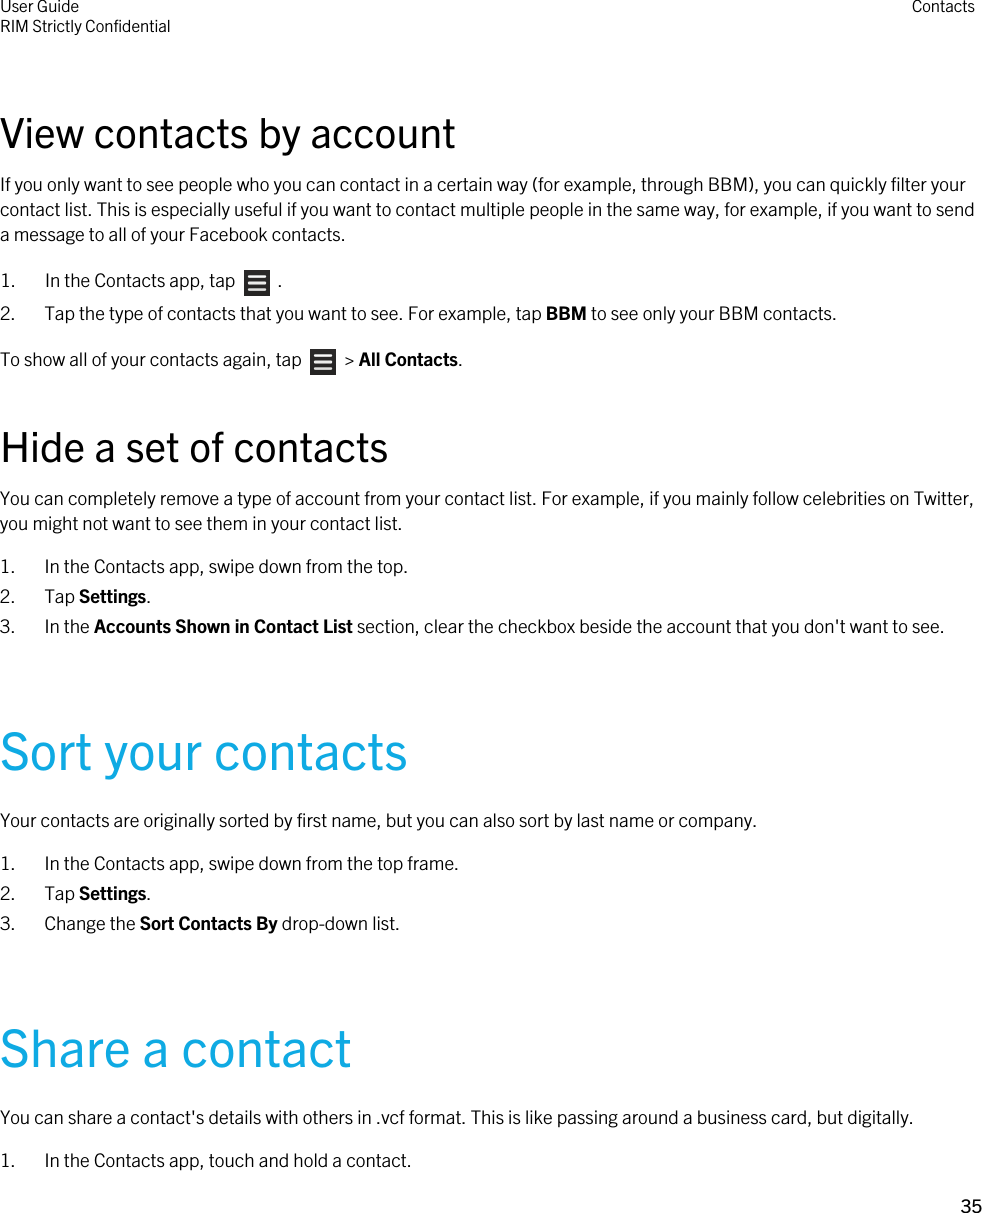 View contacts by accountIf you only want to see people who you can contact in a certain way (for example, through BBM), you can quickly filter your contact list. This is especially useful if you want to contact multiple people in the same way, for example, if you want to send a message to all of your Facebook contacts.1.  In the Contacts app, tap    .2. Tap the type of contacts that you want to see. For example, tap BBM to see only your BBM contacts.To show all of your contacts again, tap    &gt; All Contacts.Hide a set of contactsYou can completely remove a type of account from your contact list. For example, if you mainly follow celebrities on Twitter, you might not want to see them in your contact list.1. In the Contacts app, swipe down from the top.2. Tap Settings.3. In the Accounts Shown in Contact List section, clear the checkbox beside the account that you don&apos;t want to see.Sort your contactsYour contacts are originally sorted by first name, but you can also sort by last name or company.1. In the Contacts app, swipe down from the top frame.2. Tap Settings.3. Change the Sort Contacts By drop-down list.Share a contactYou can share a contact&apos;s details with others in .vcf format. This is like passing around a business card, but digitally.1. In the Contacts app, touch and hold a contact.User GuideRIM Strictly ConfidentialContacts35 